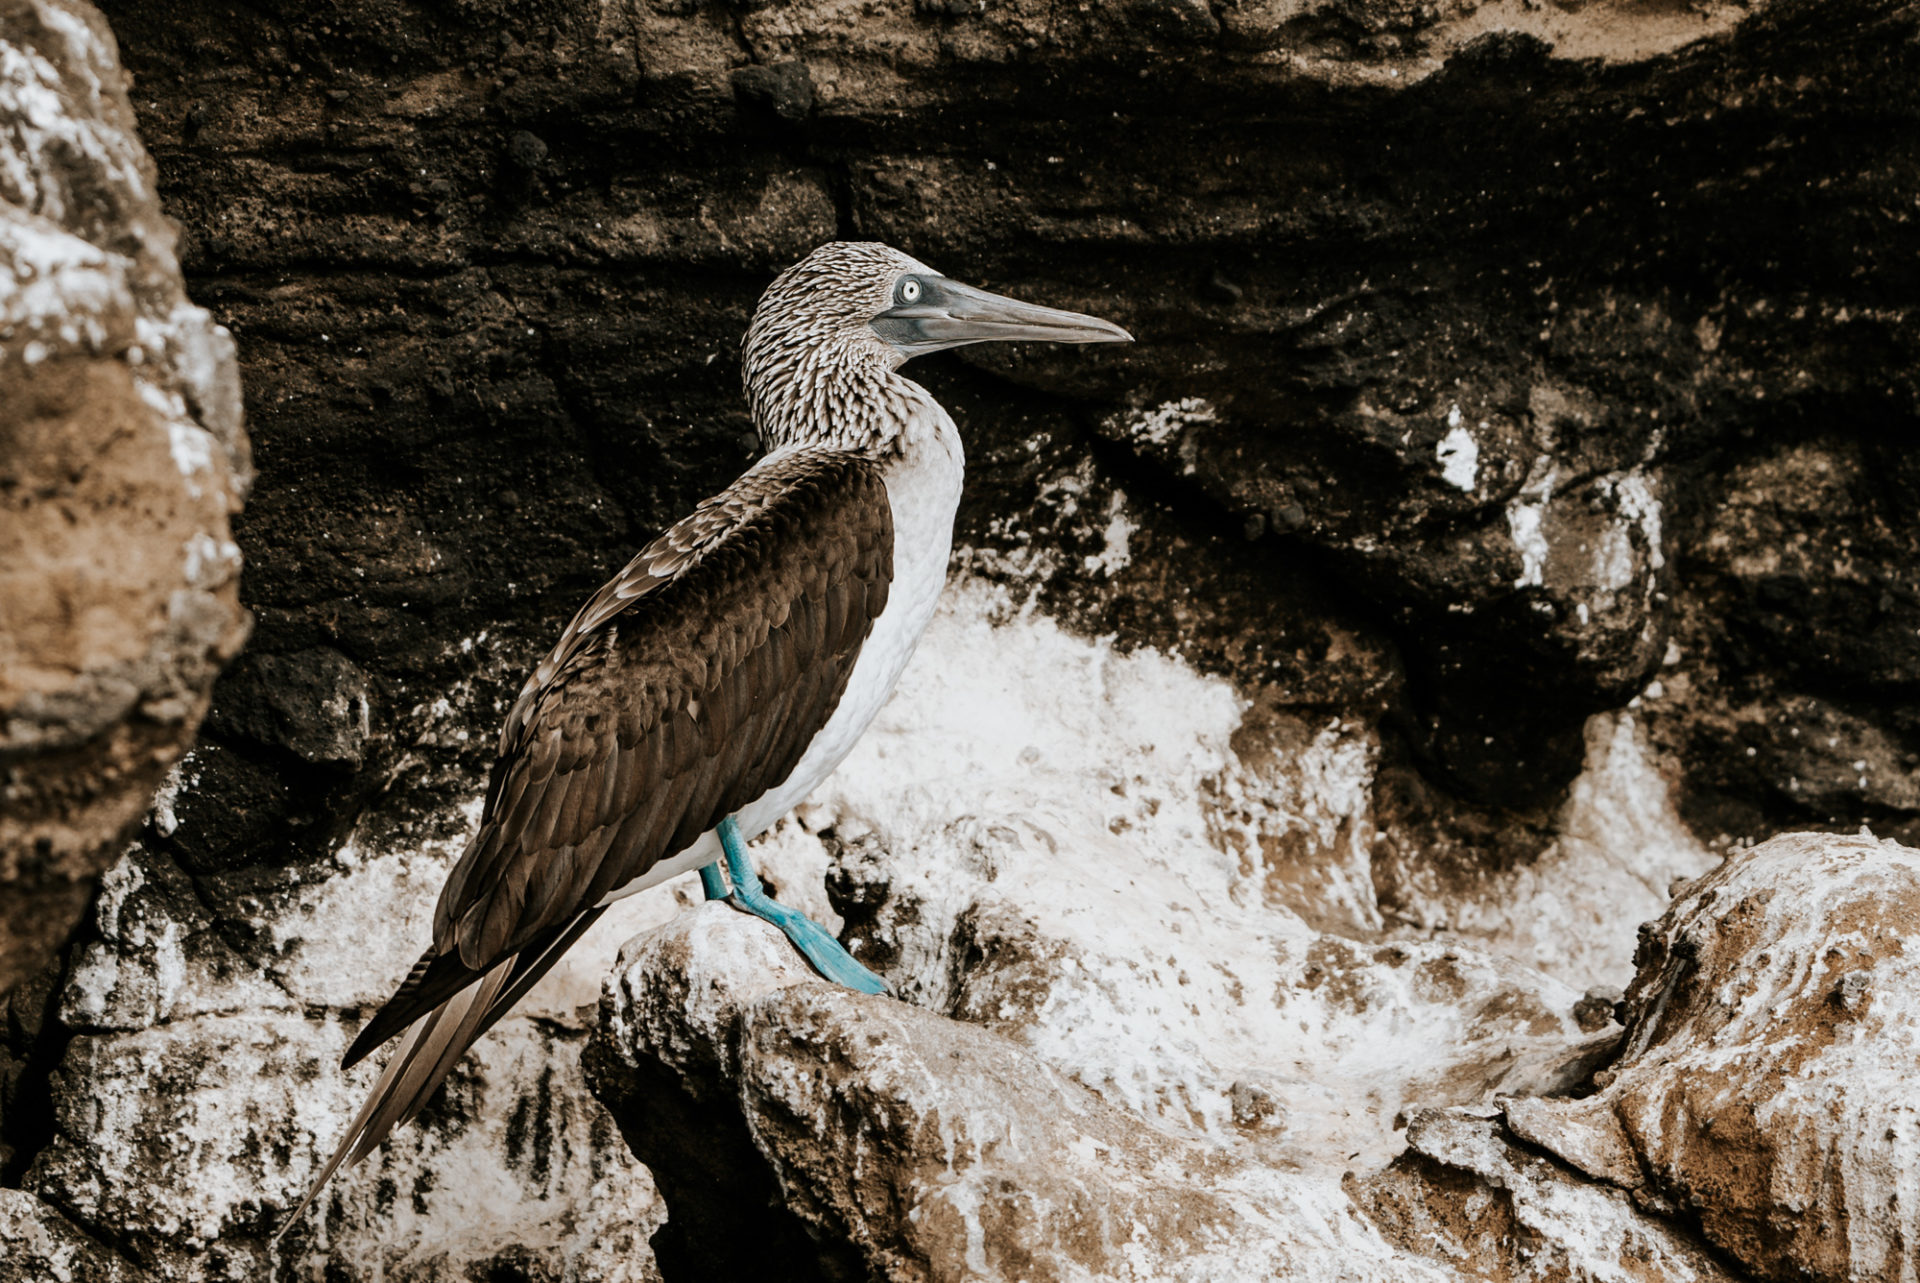 animals of the Galapagos islands